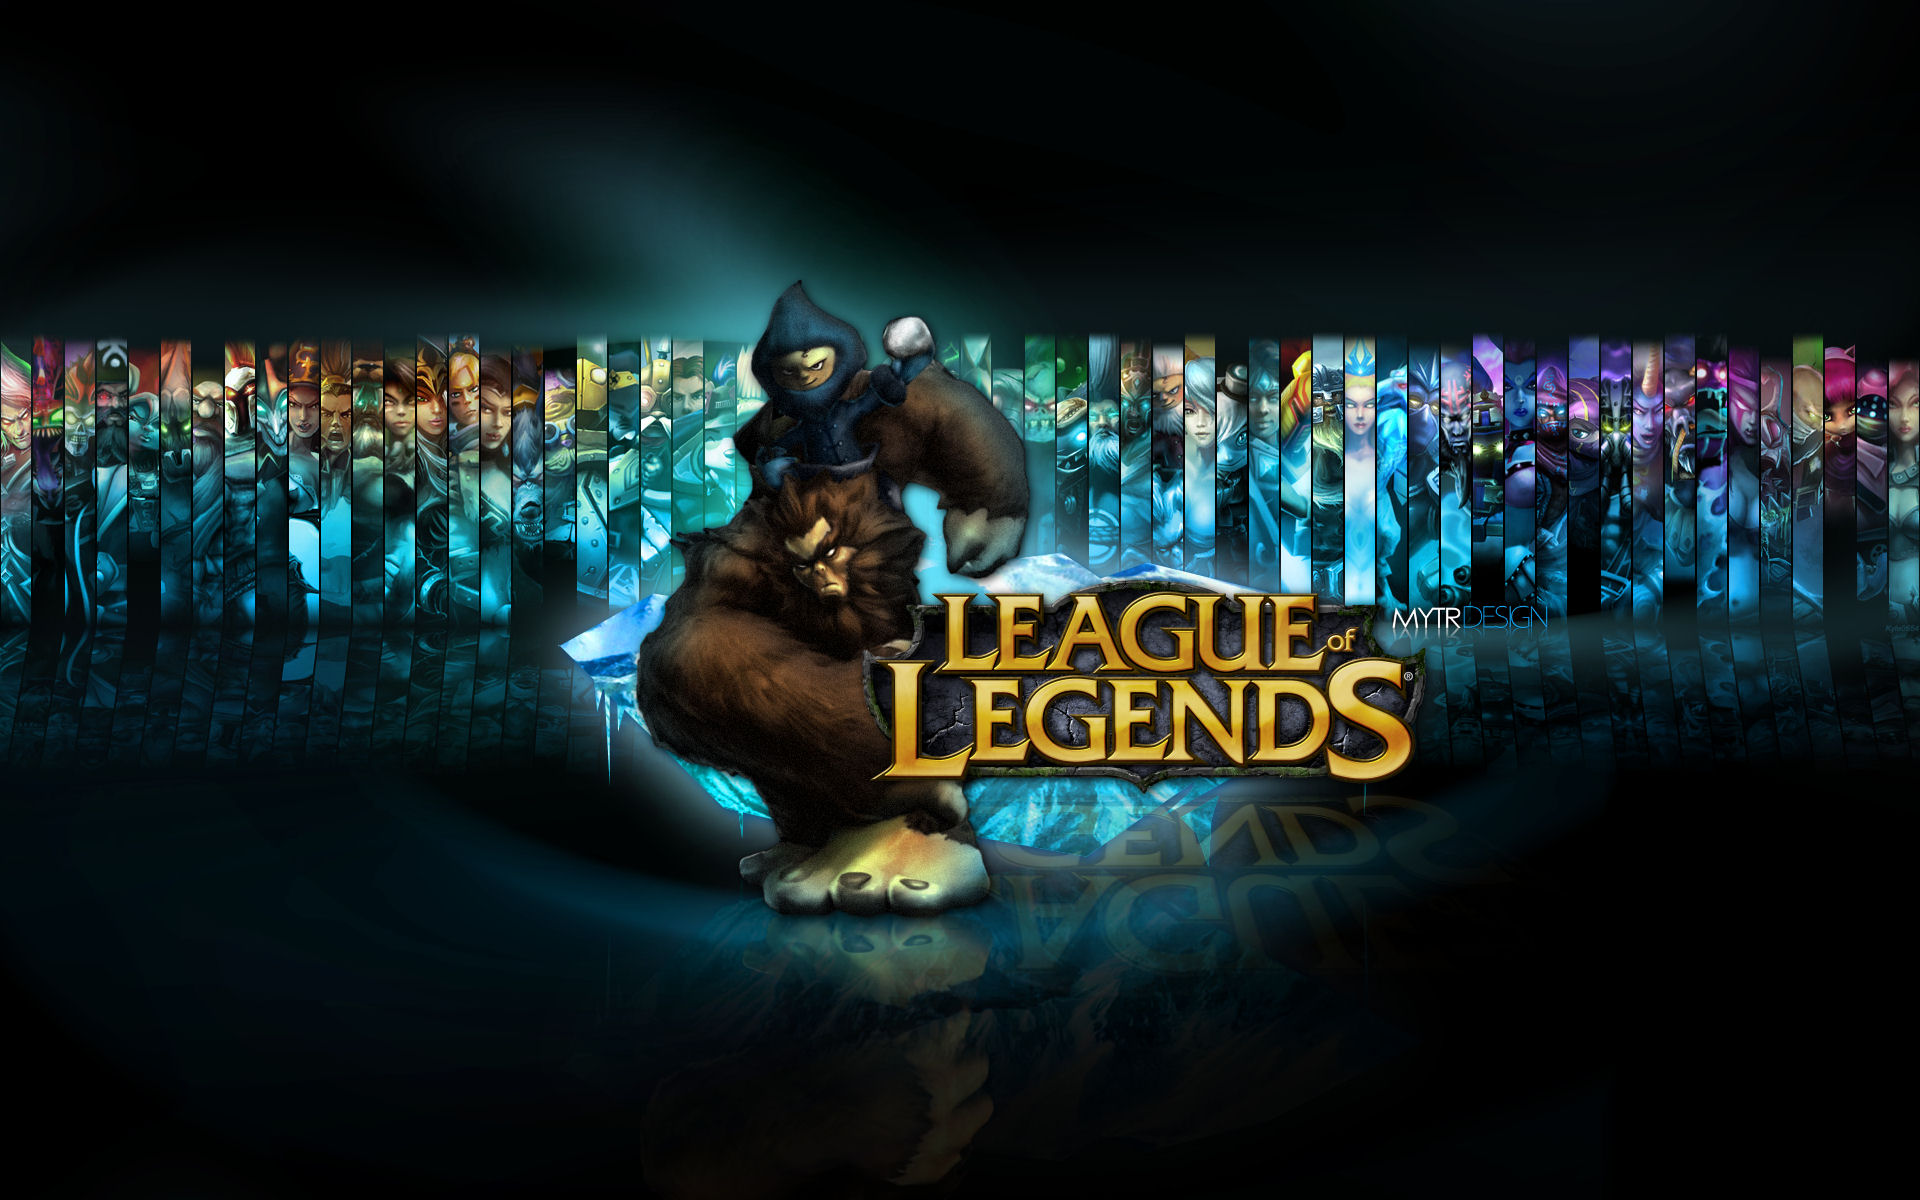 Free Download Have A Very Cool Pack Of Hd Lol Wallpapers For League Of Legends 19x10 For Your Desktop Mobile Tablet Explore 49 League Of Legends Iphone Wallpaper League